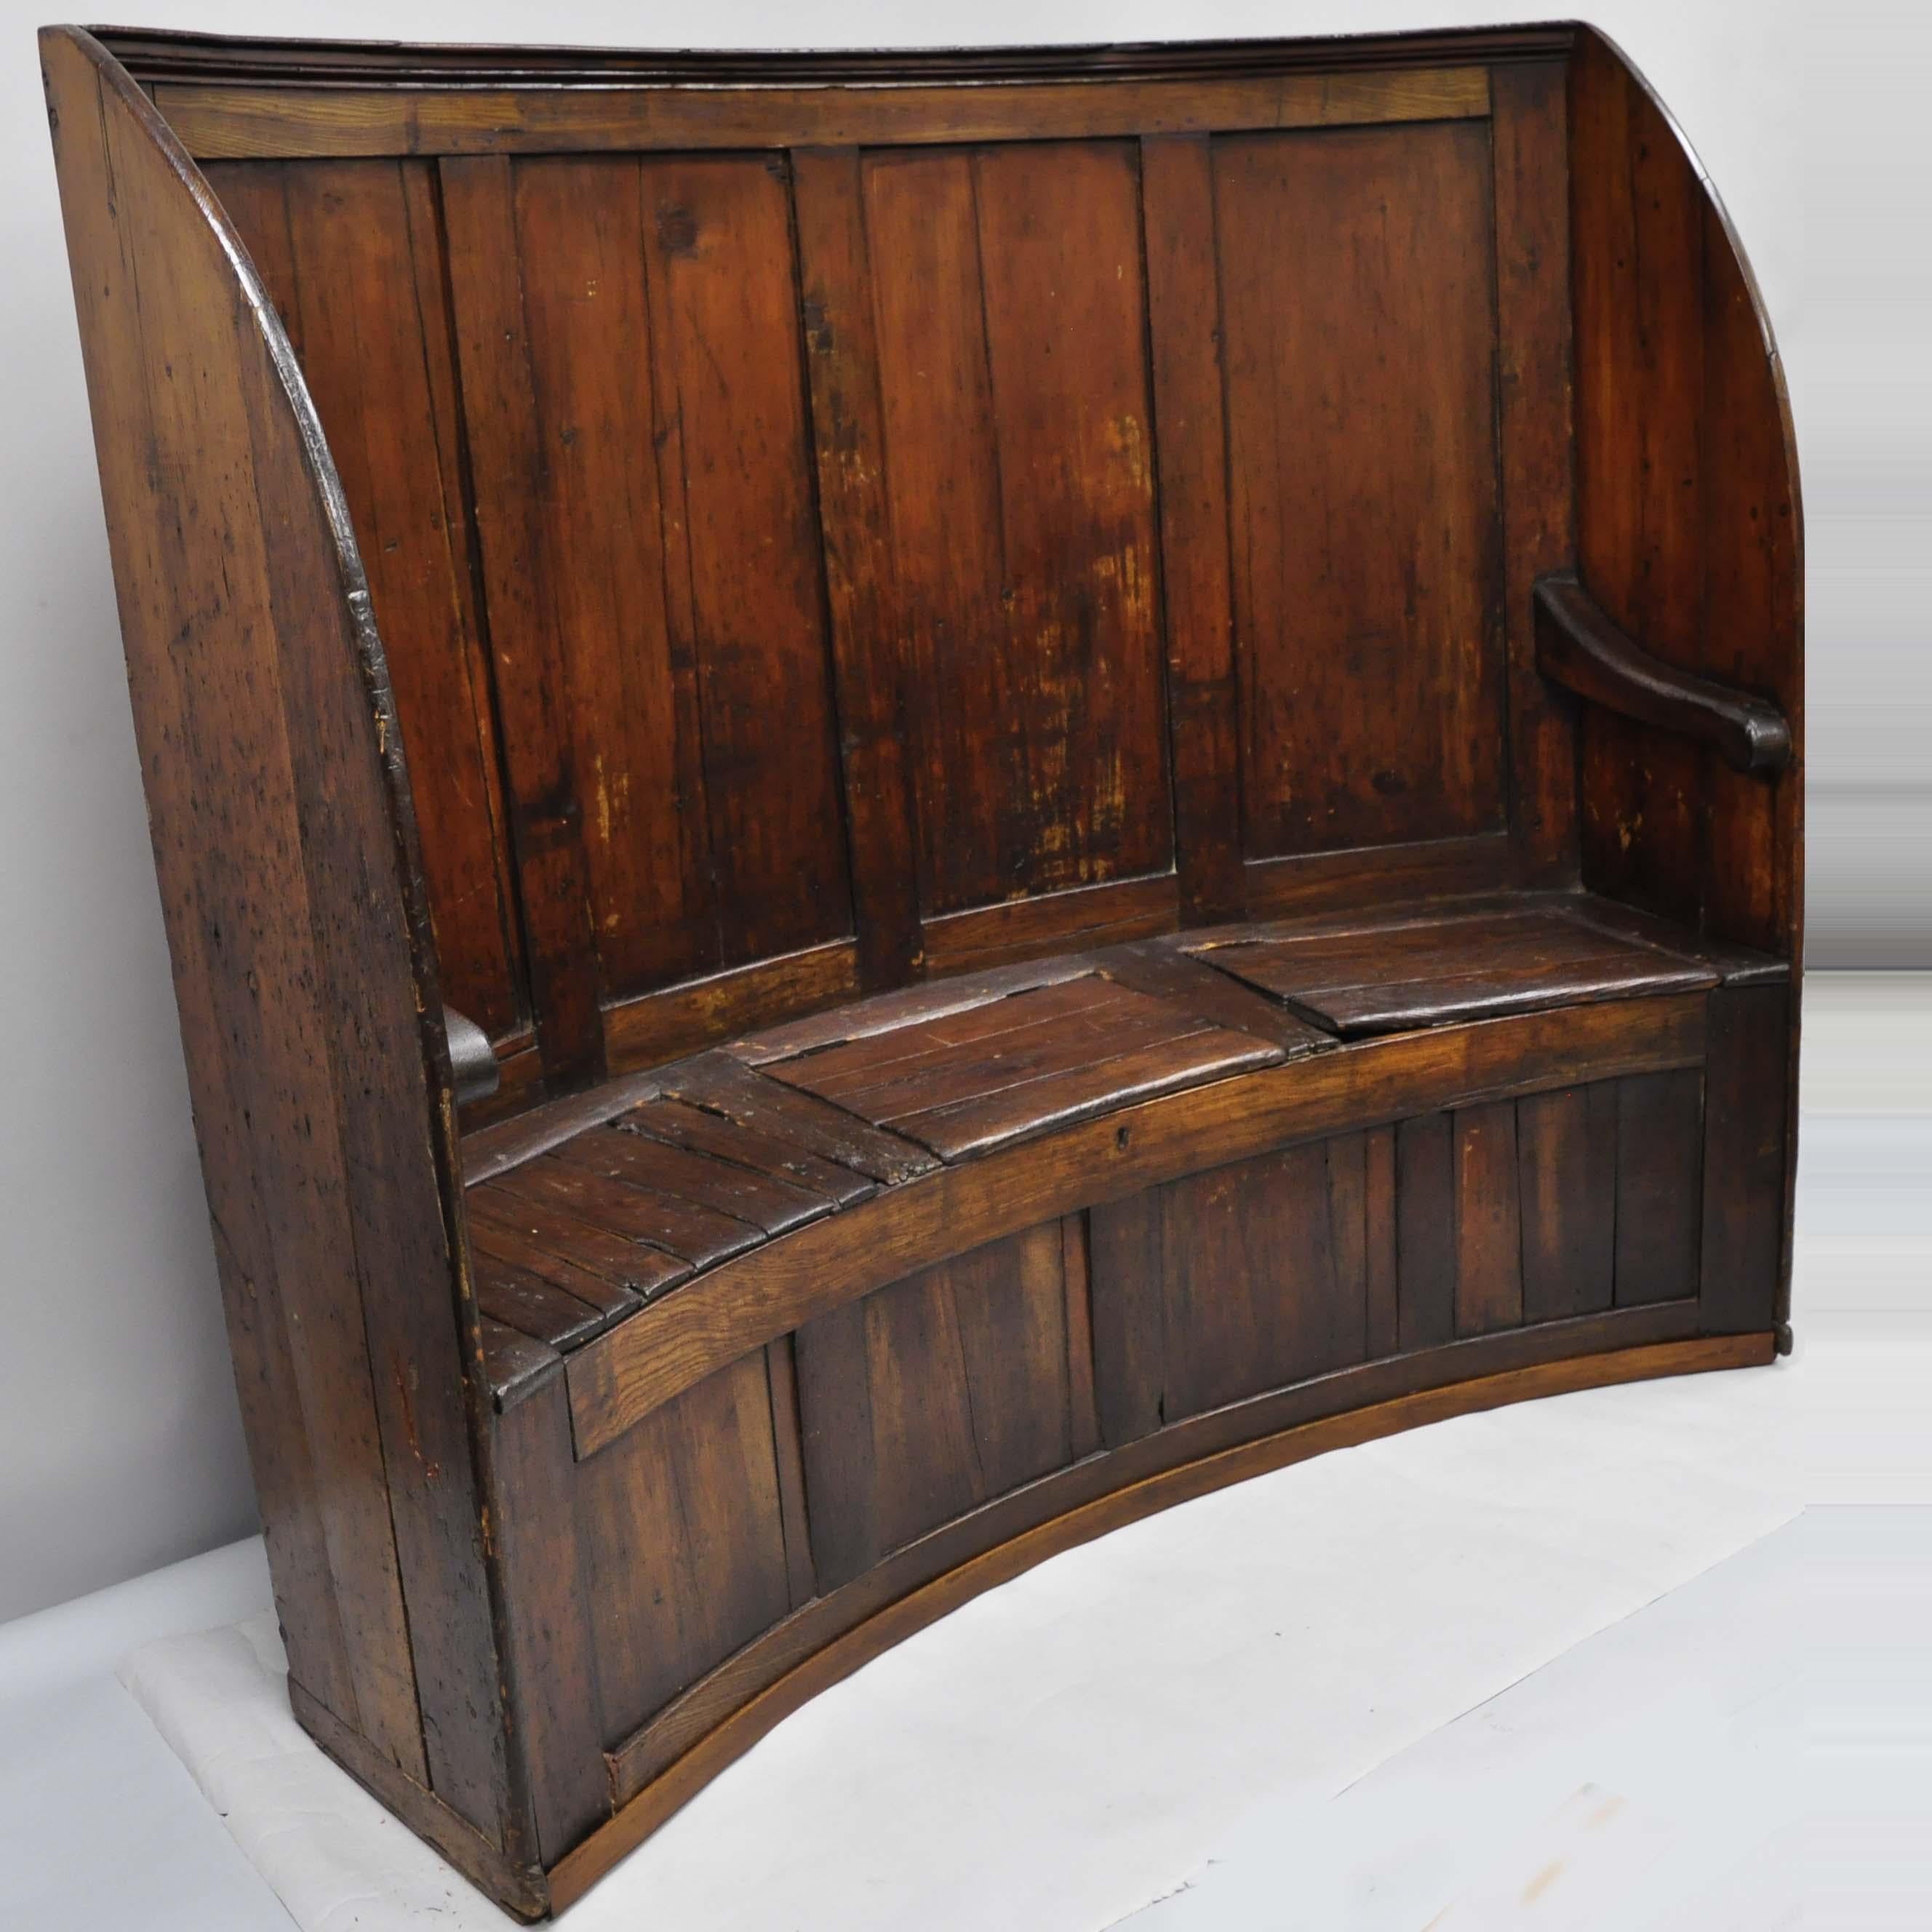 18th century antique high back curved English pine wood pub sette hall storage bench. Item features tall curved form, remarkable patina, 3 lift off storage seats, solid wood construction, beautiful woodgrain, nicely carved details, very nice antique